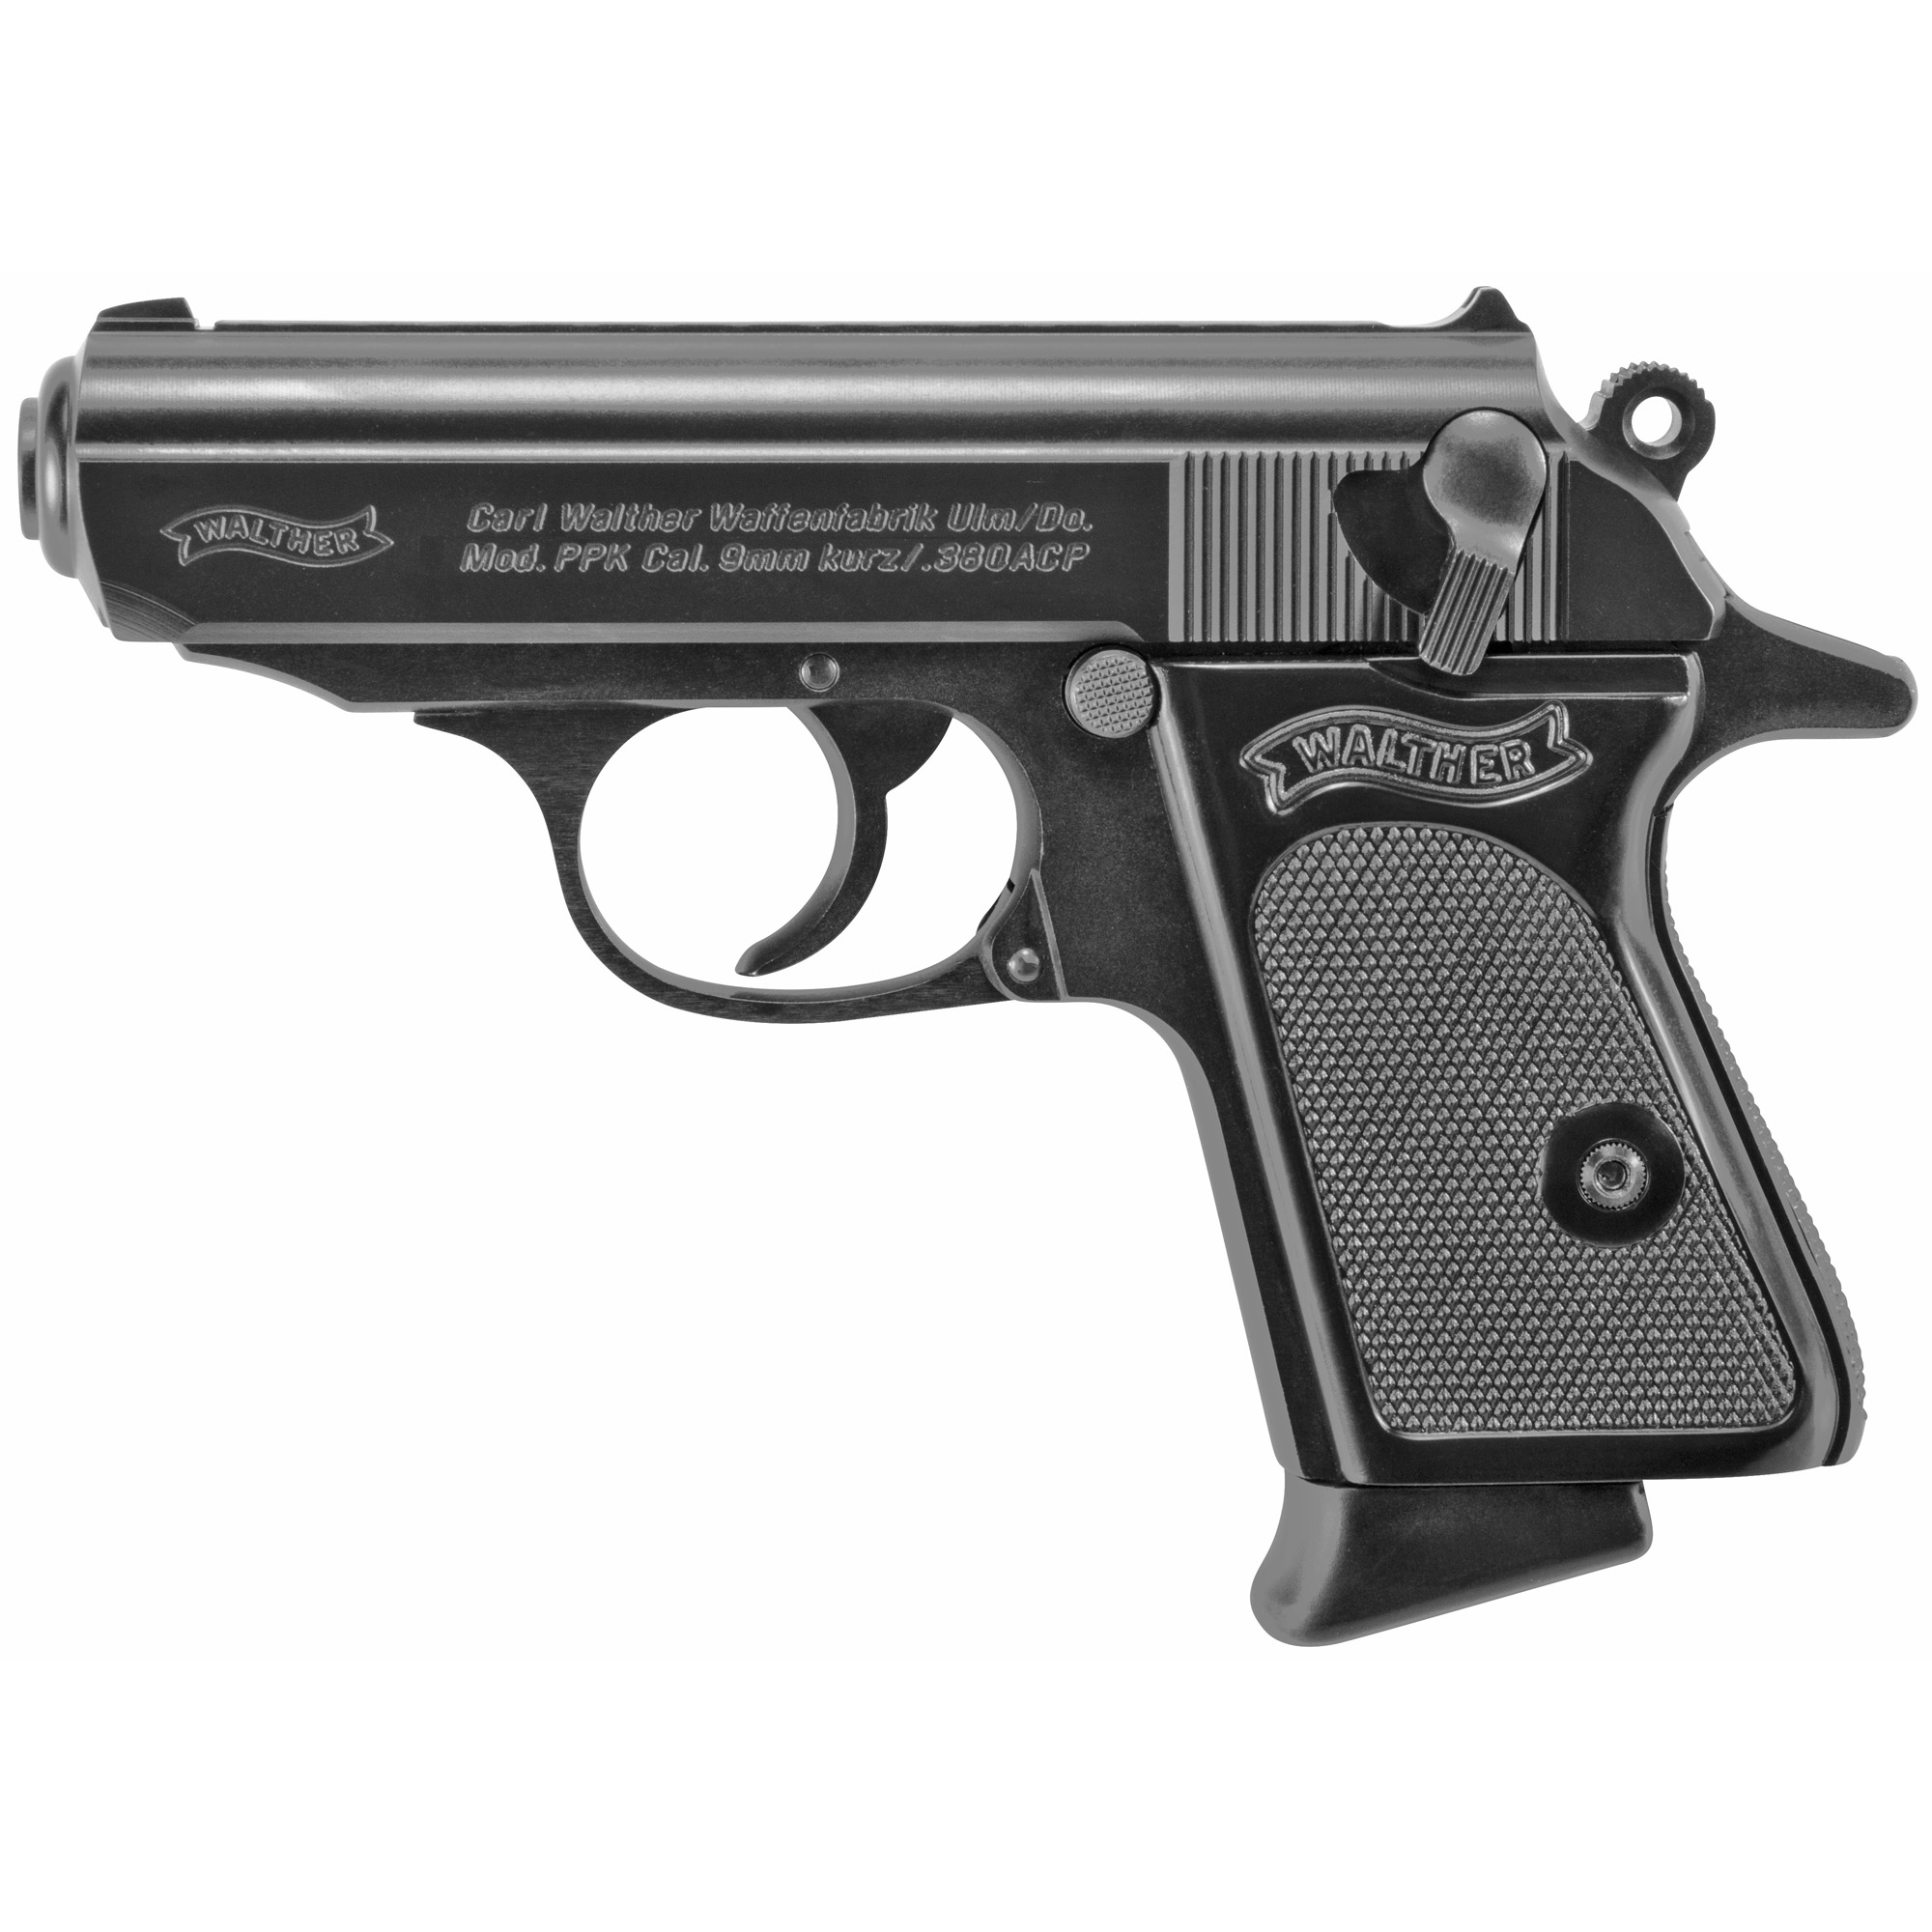 WALTHER PPK 380ACP 3.3 6RD BLK